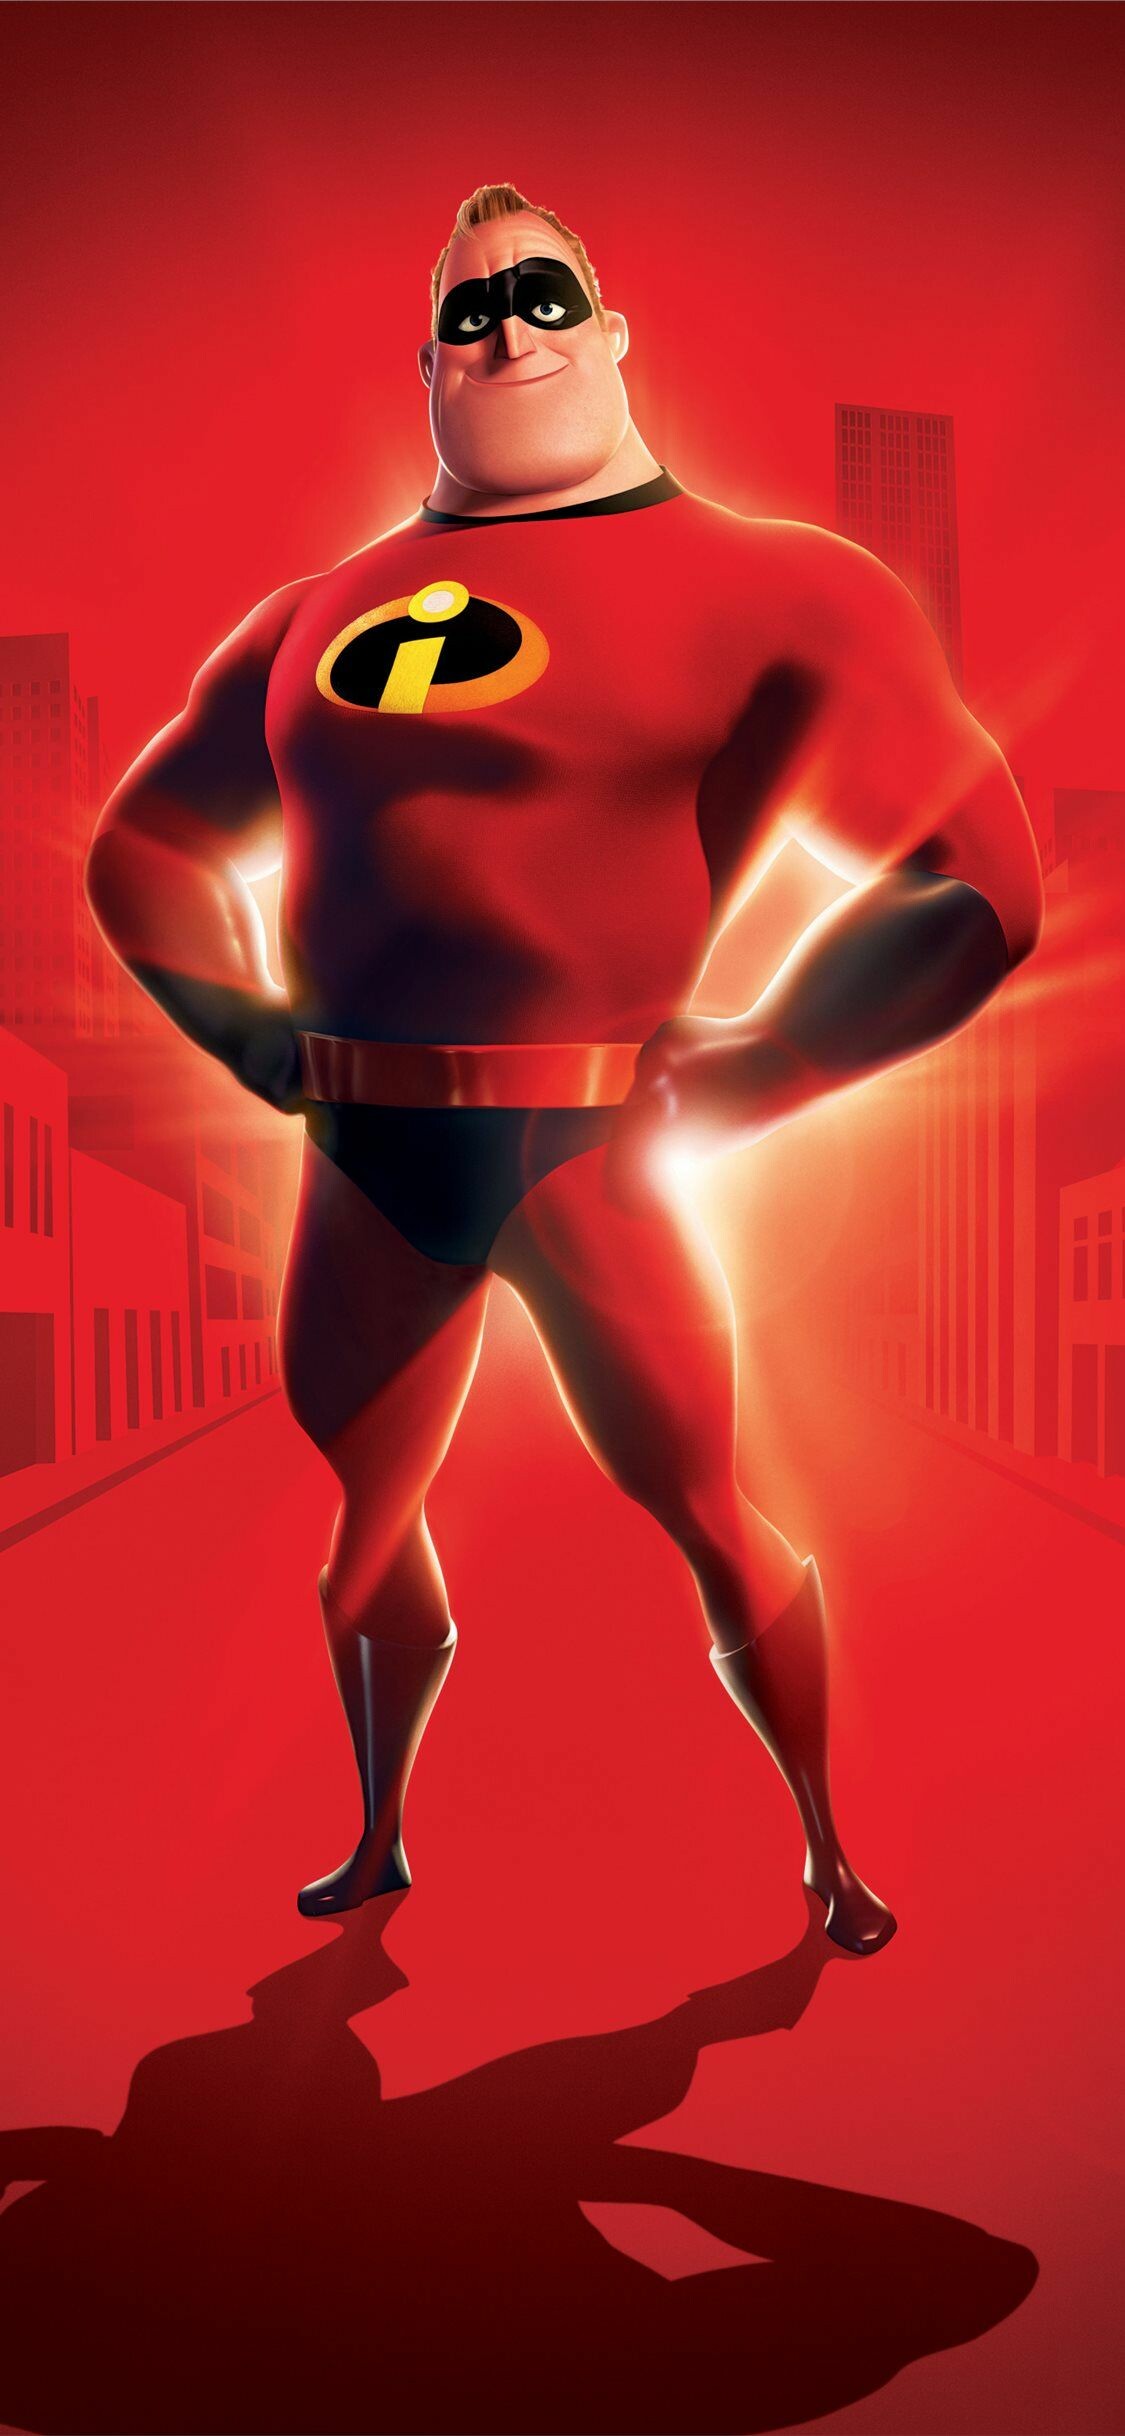 The Incredibles: A superhuman that has superhuman strength, durability, and stamina. 1130x2440 HD Wallpaper.